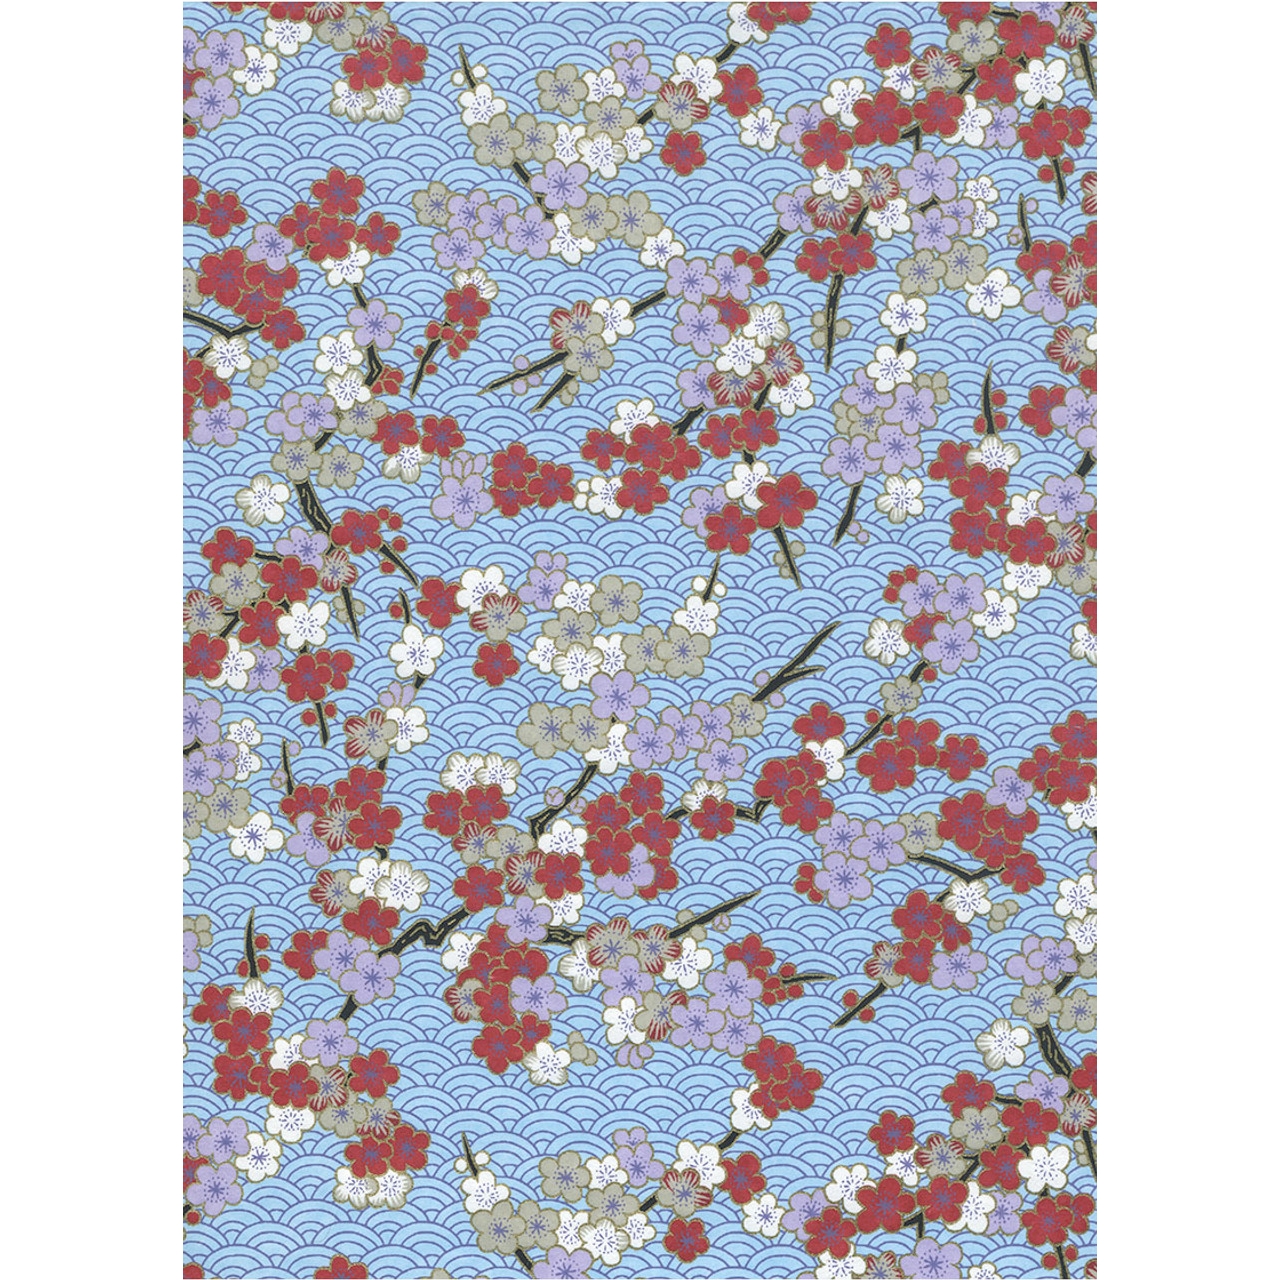 Chiyogami 1049C 19 1/2"x26"- Pink and burgundy flowers on light blue background